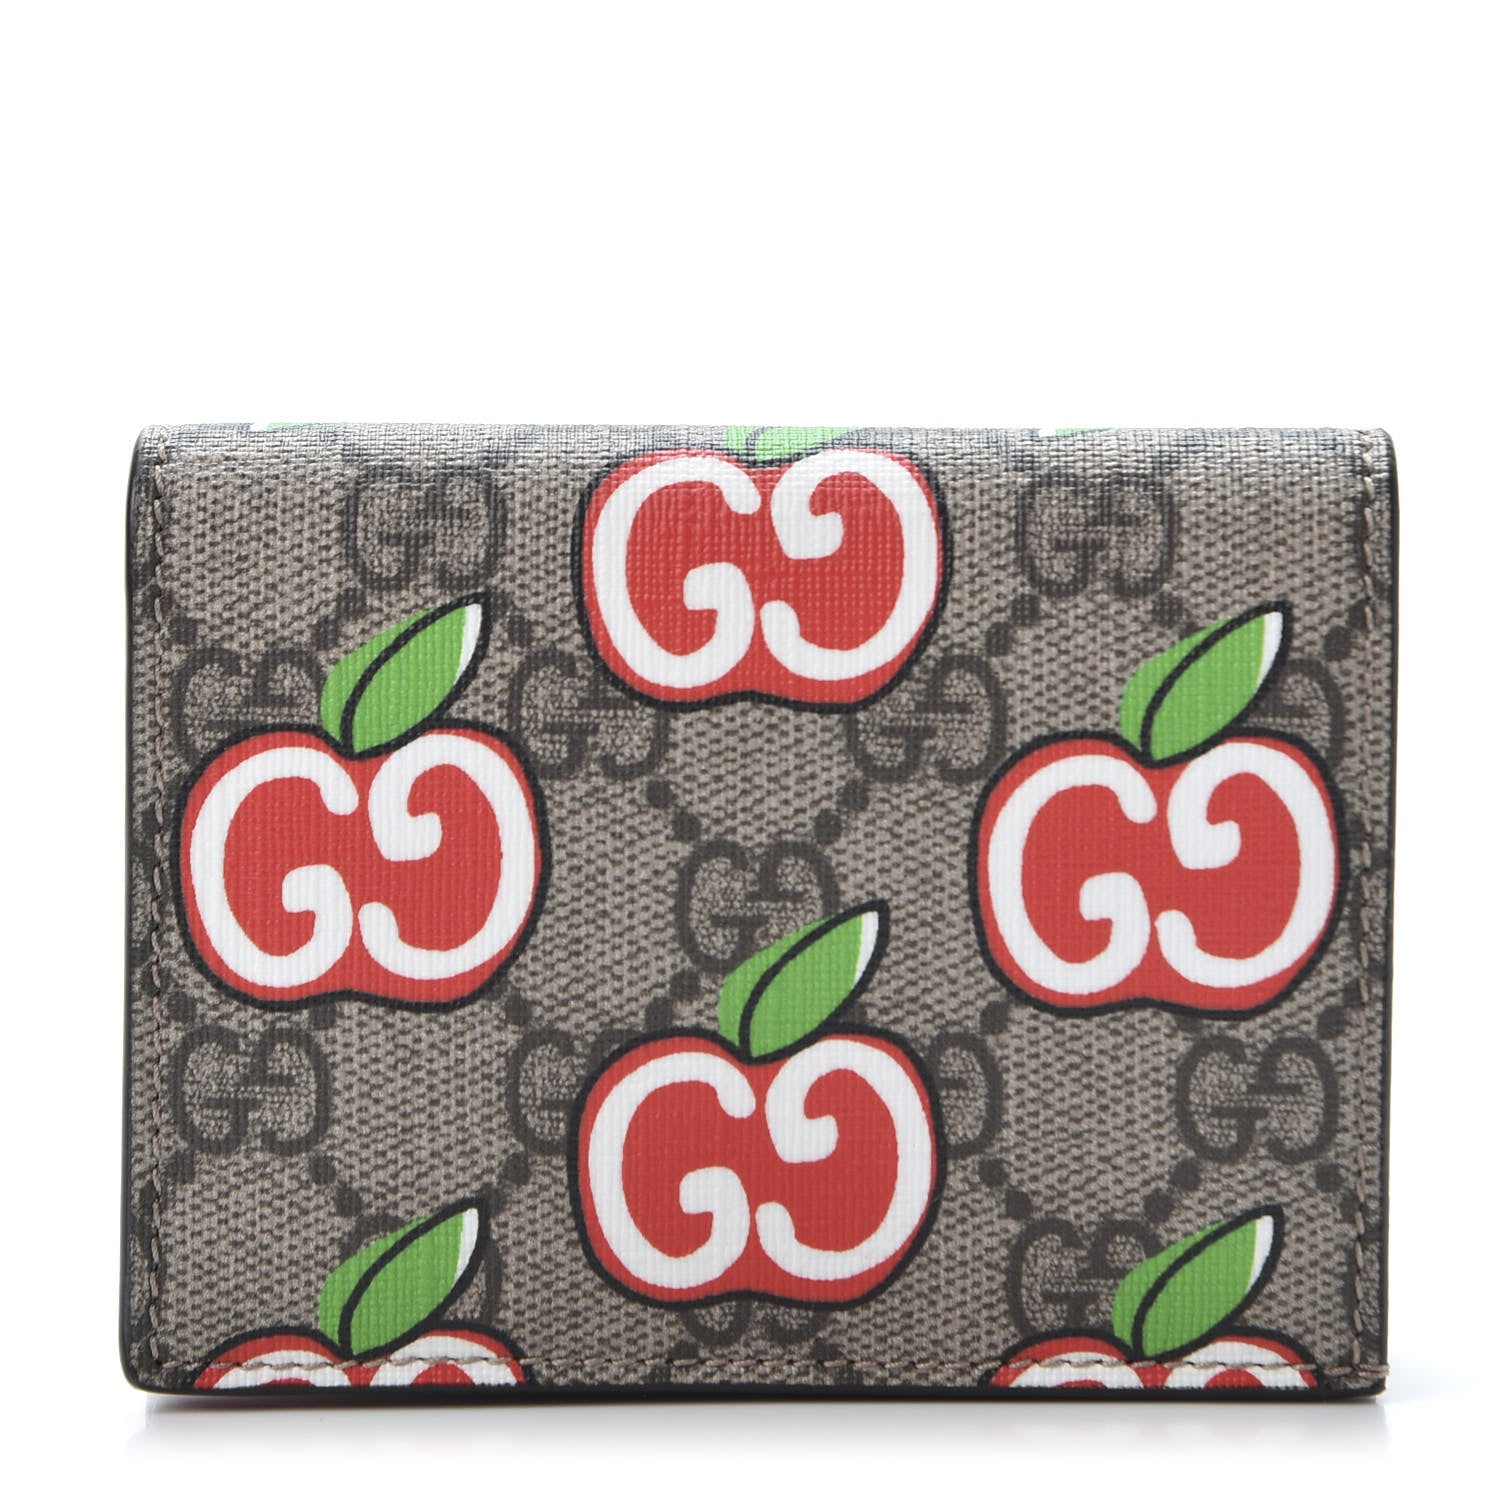 Gucci's new collection features an apple-shaped GG Monogram